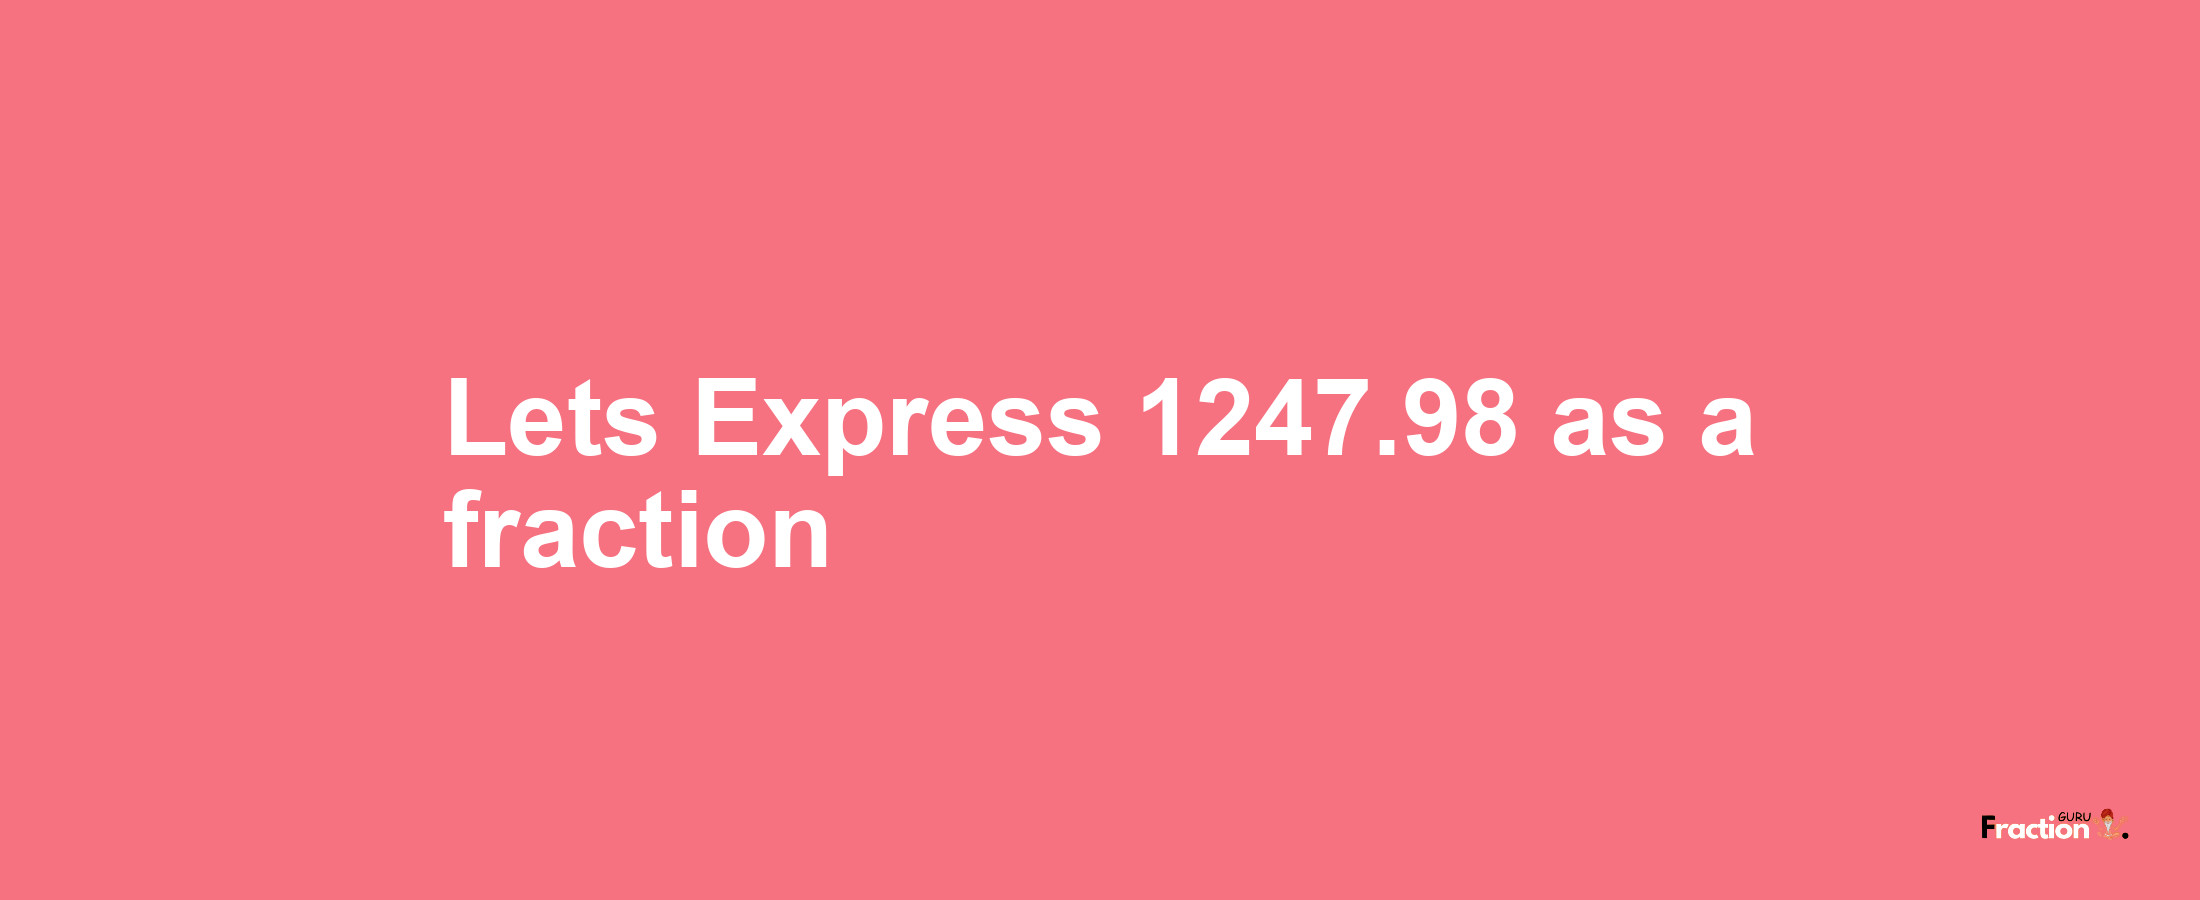 Lets Express 1247.98 as afraction